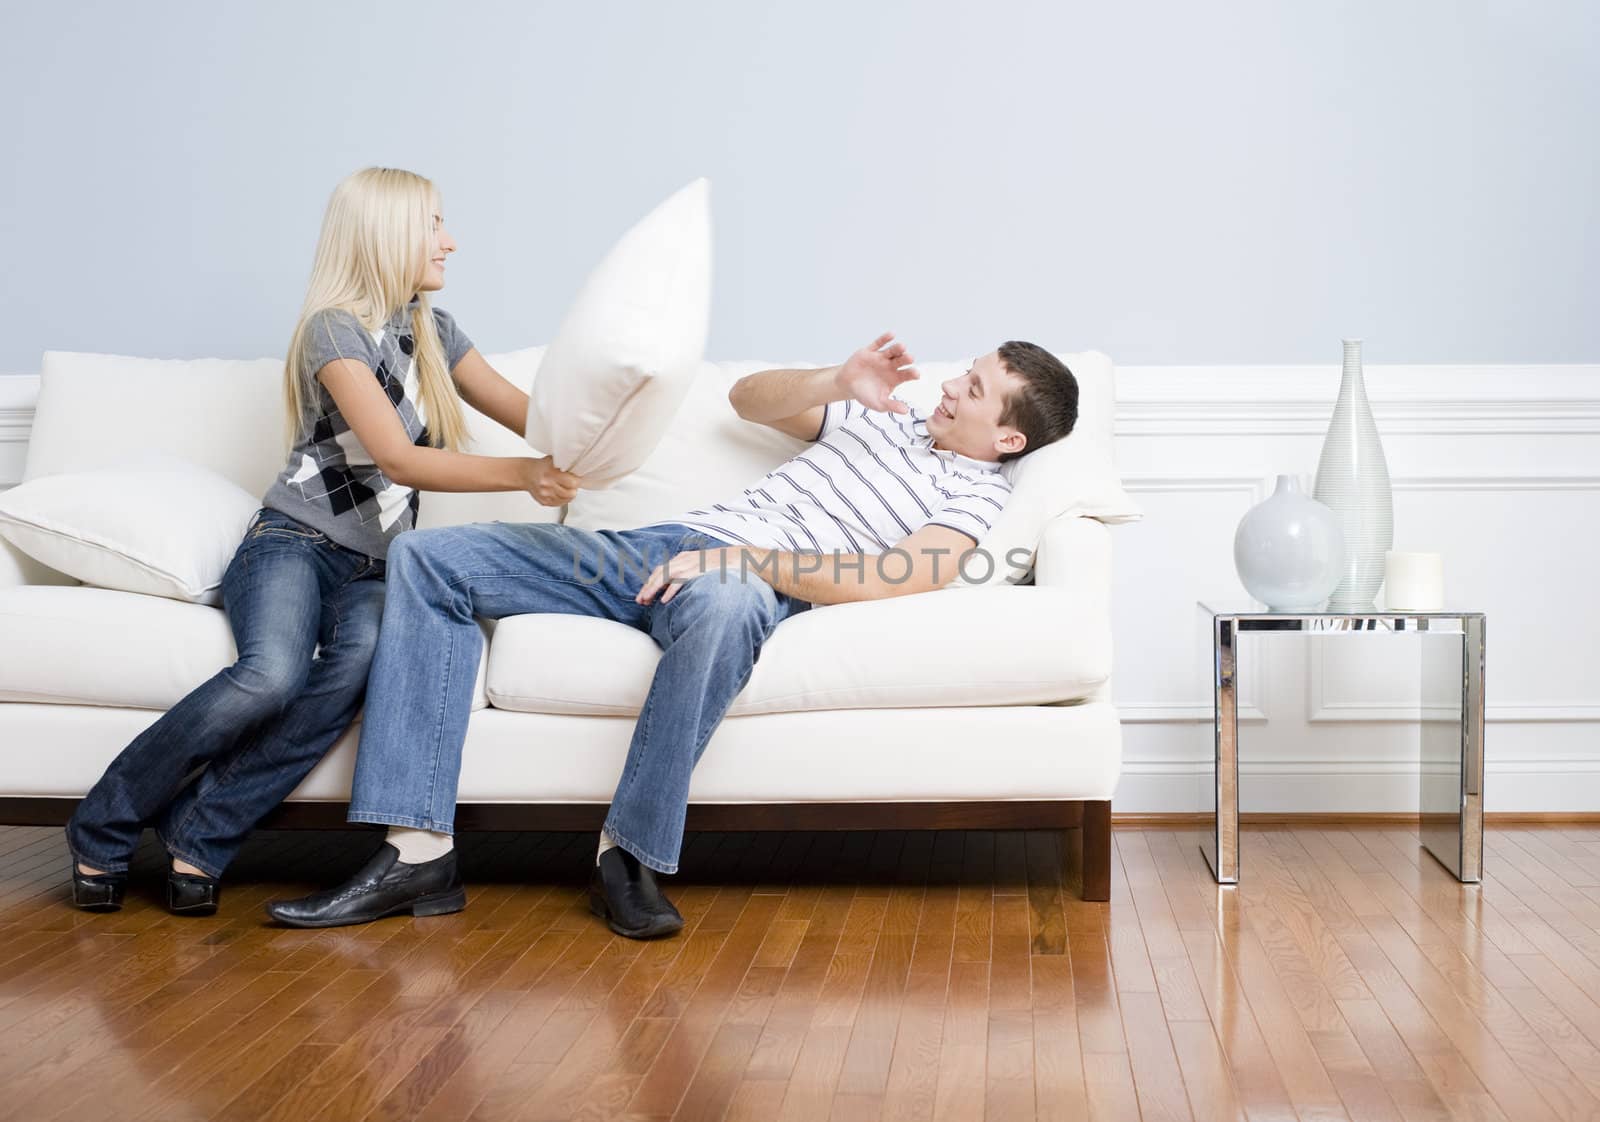 Young couple playfully have a pillow fight on a sofa.  The young man tries to avoid getting hit. Horizontal shot.